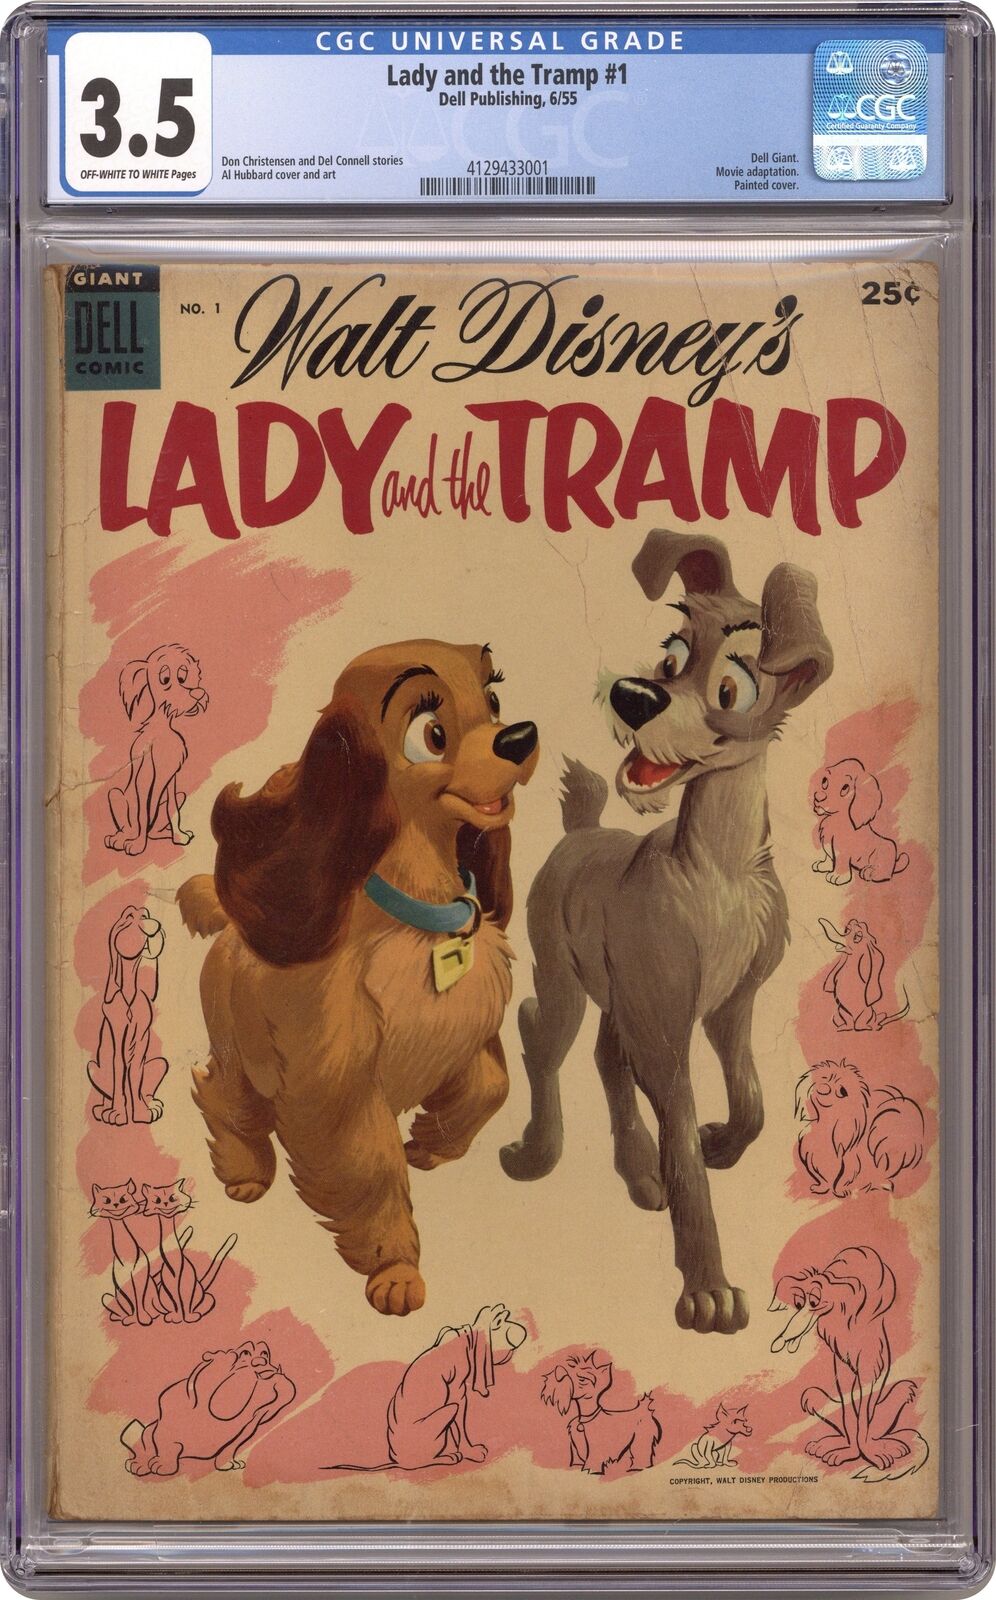 Dell Giant Lady and the Tramp #1 CGC 3.5 1955 4129433001